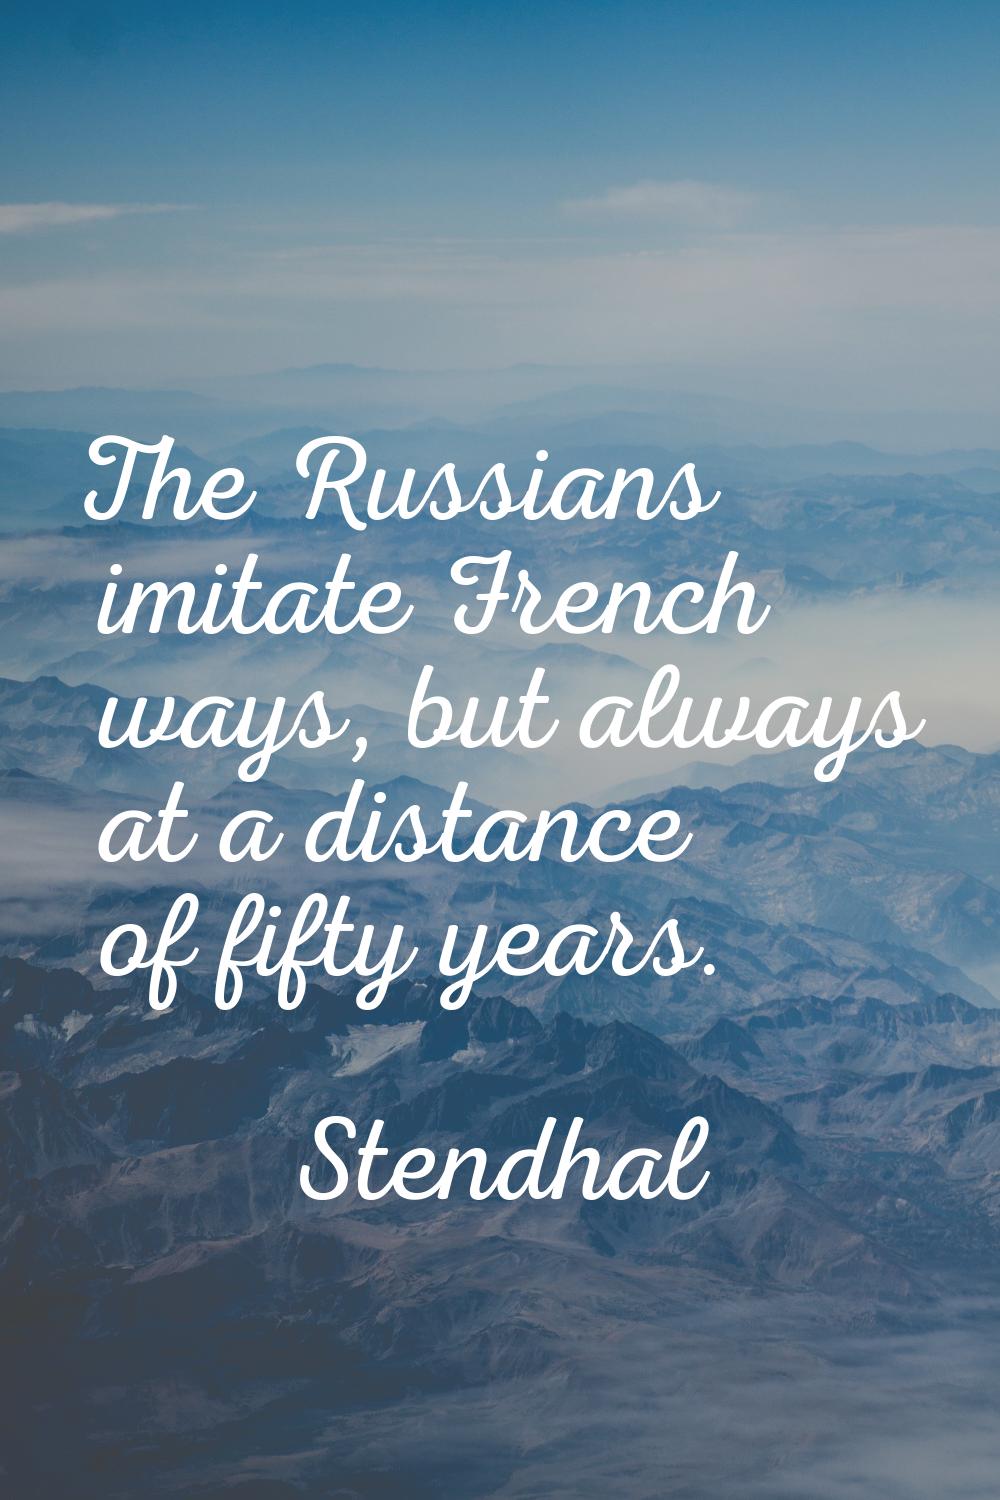 The Russians imitate French ways, but always at a distance of fifty years.